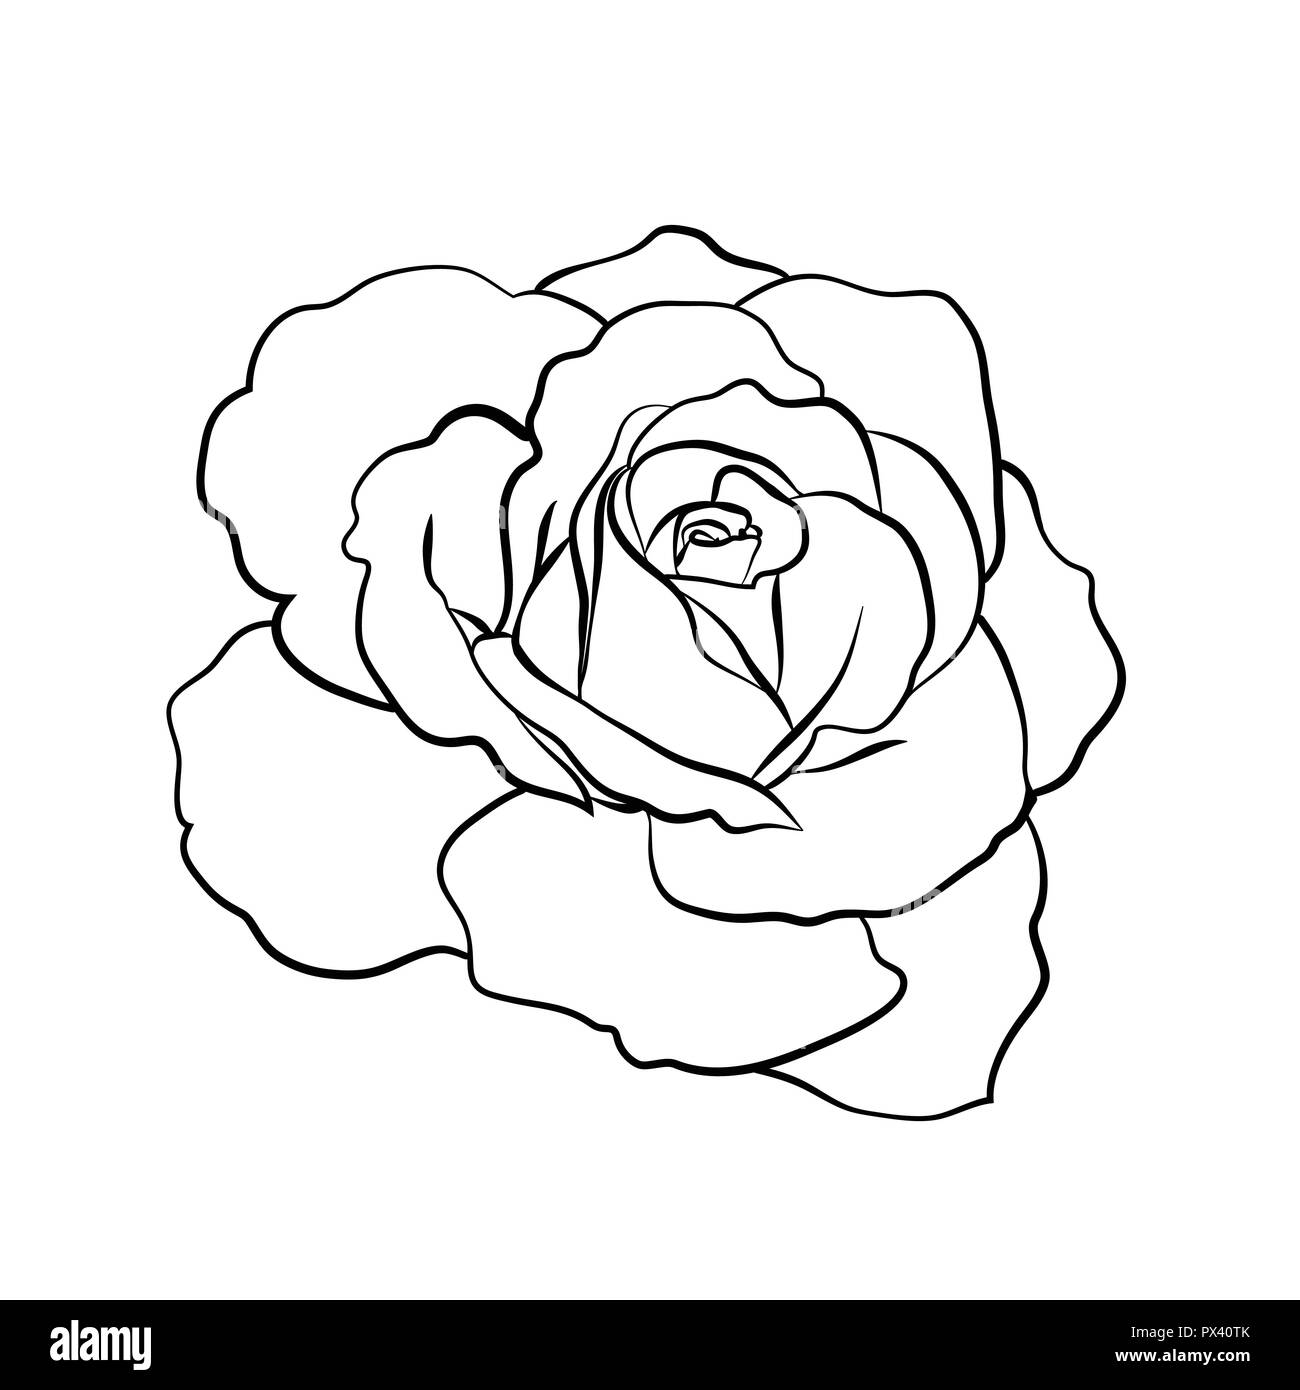 Rose sketch on white background Stock Vector